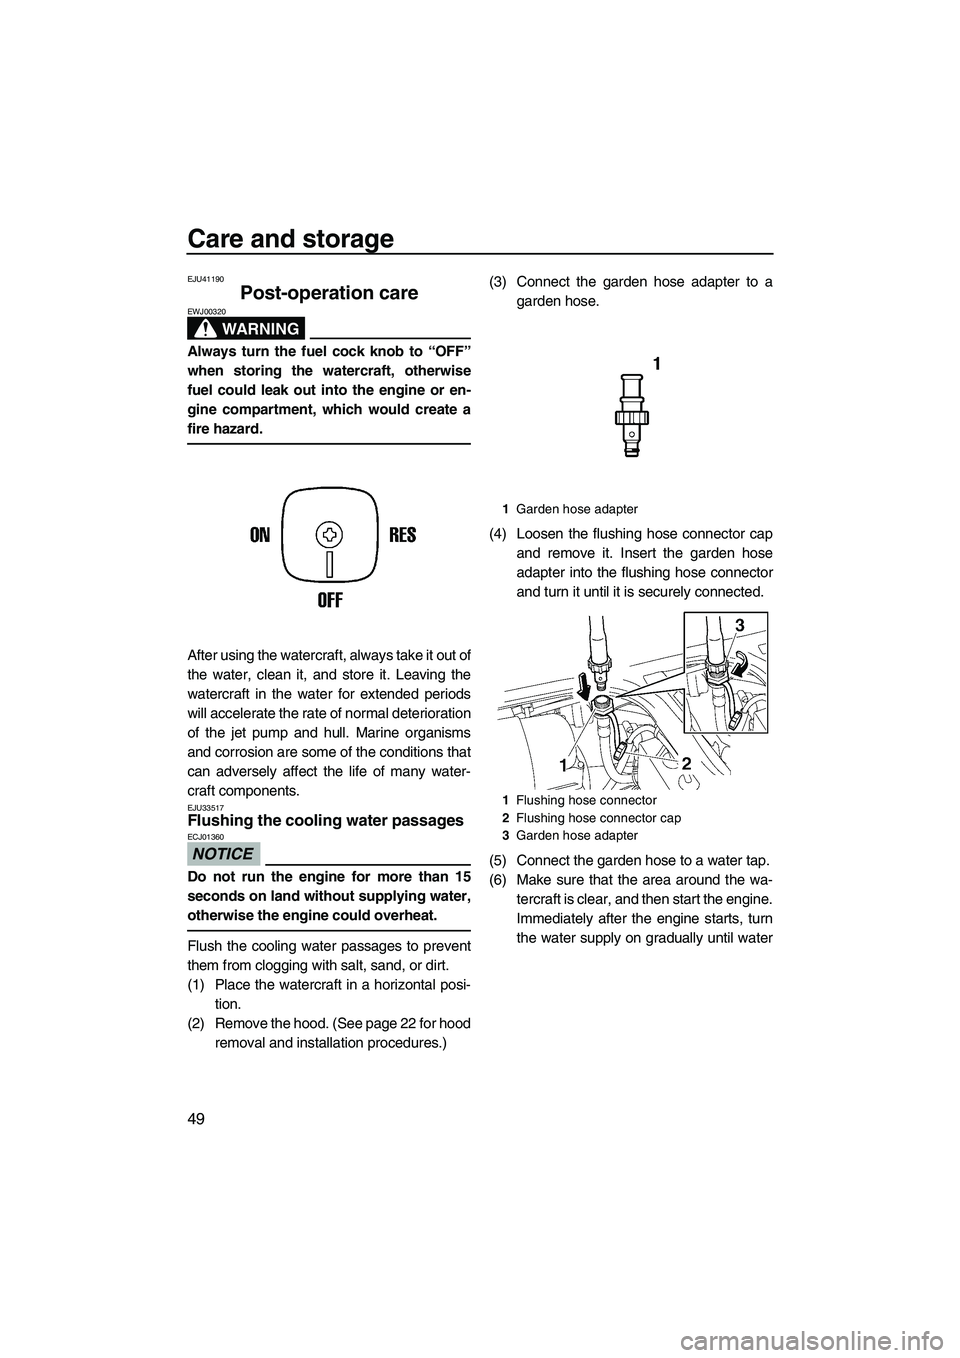 YAMAHA SUPERJET 2010  Owners Manual Care and storage
49
EJU41190
Post-operation care 
WARNING
EWJ00320
Always turn the fuel cock knob to “OFF”
when storing the watercraft, otherwise
fuel could leak out into the engine or en-
gine co